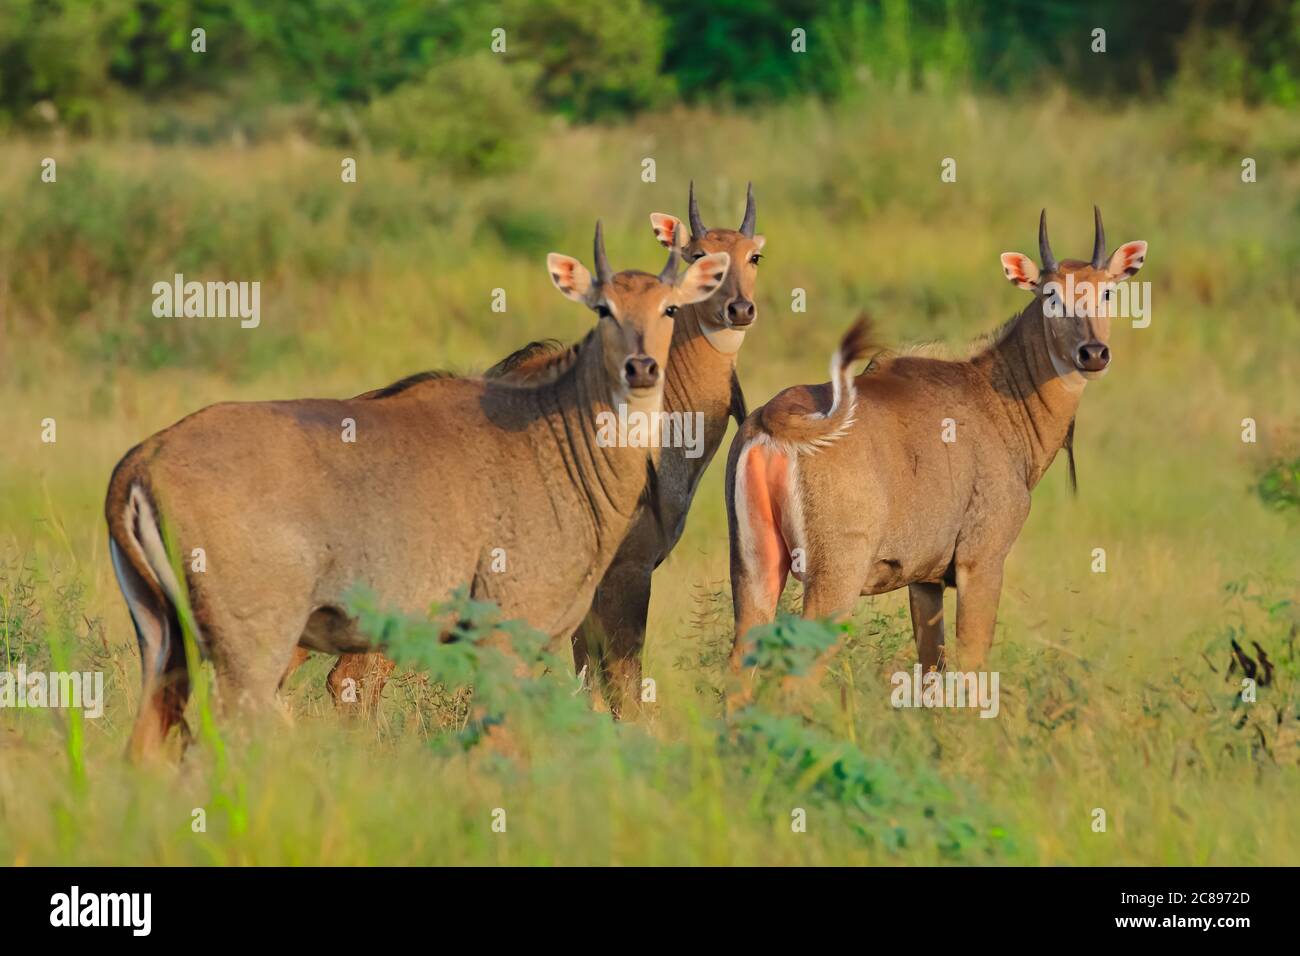 Selective focus photo of a group of Blue bulls also called Nilgai the largest antelope found in Indian subcontinent at Rajasthan India Stock Photo